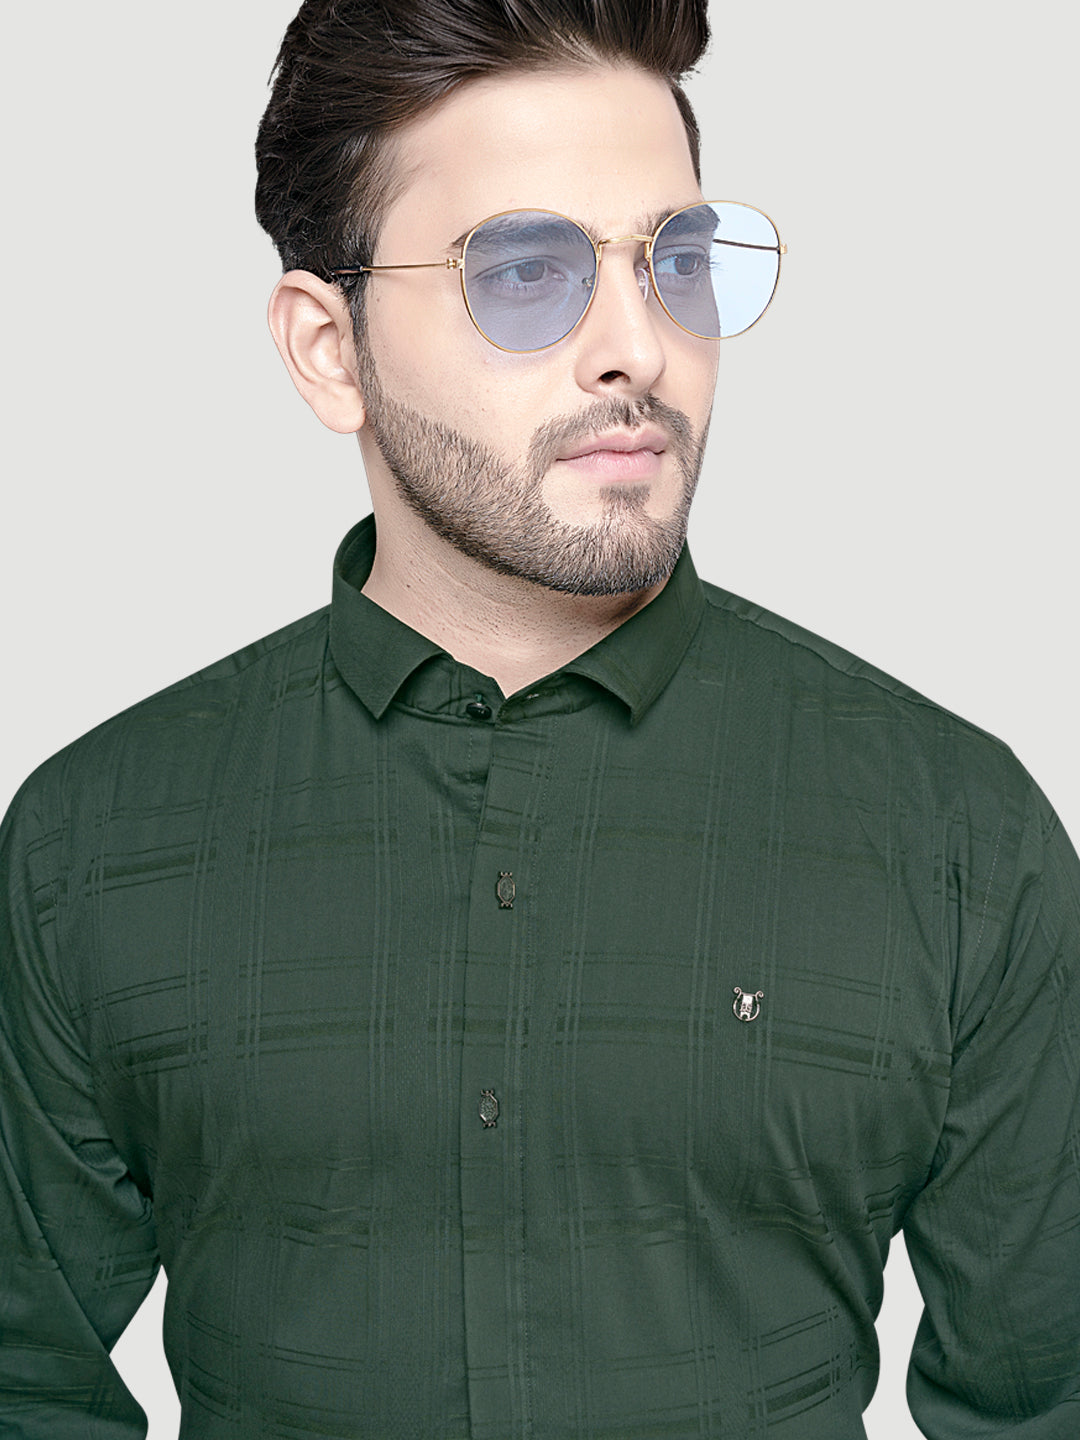 Designer Shirts with Collar Accessories- Green